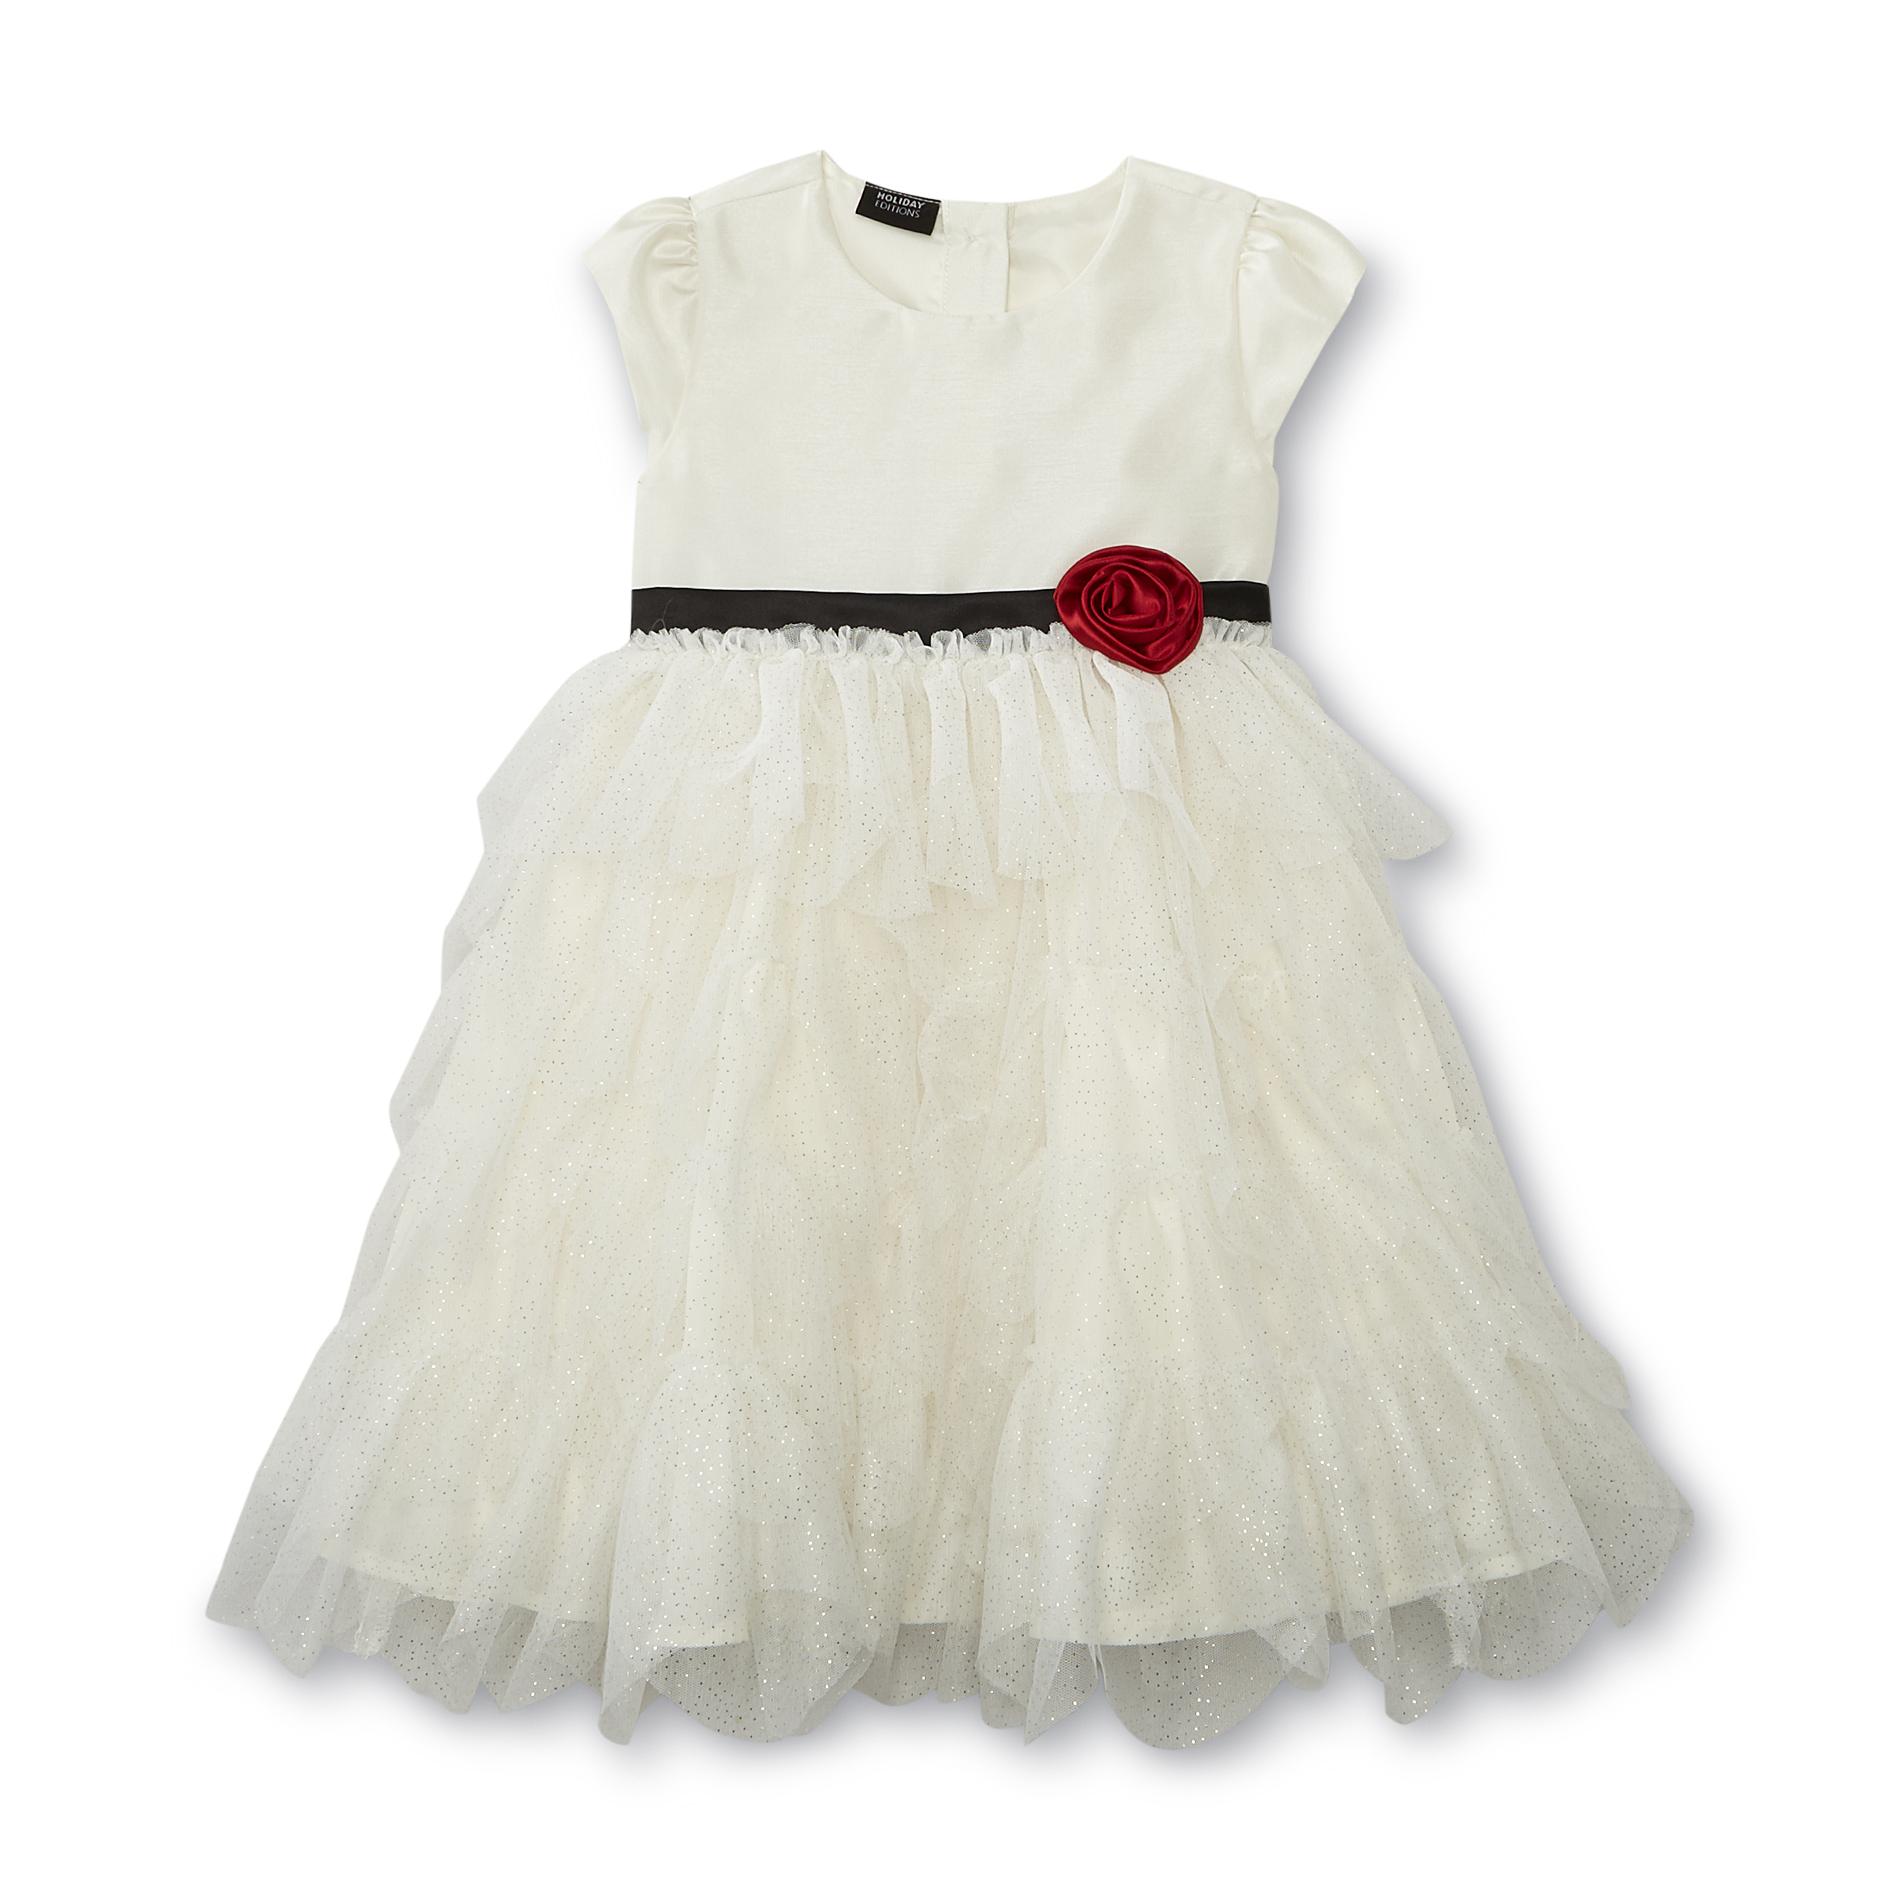 Holiday Editions Infant & Toddler Girl's Occasion Dress